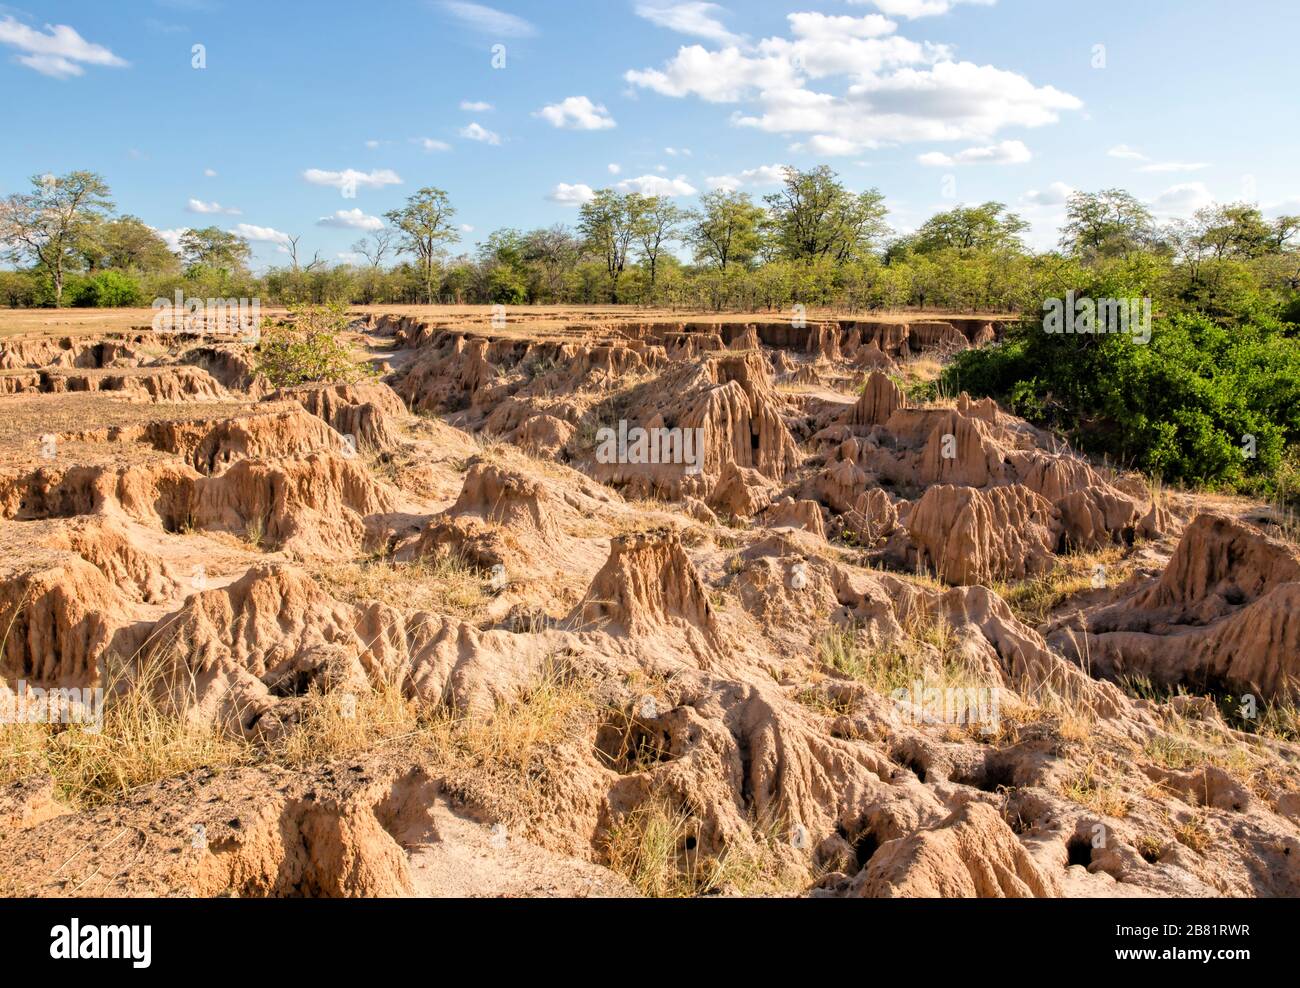 Soil erosion on the banks of the Zambezi River, thought to be caused by numerous out-of-season floods. Stock Photo